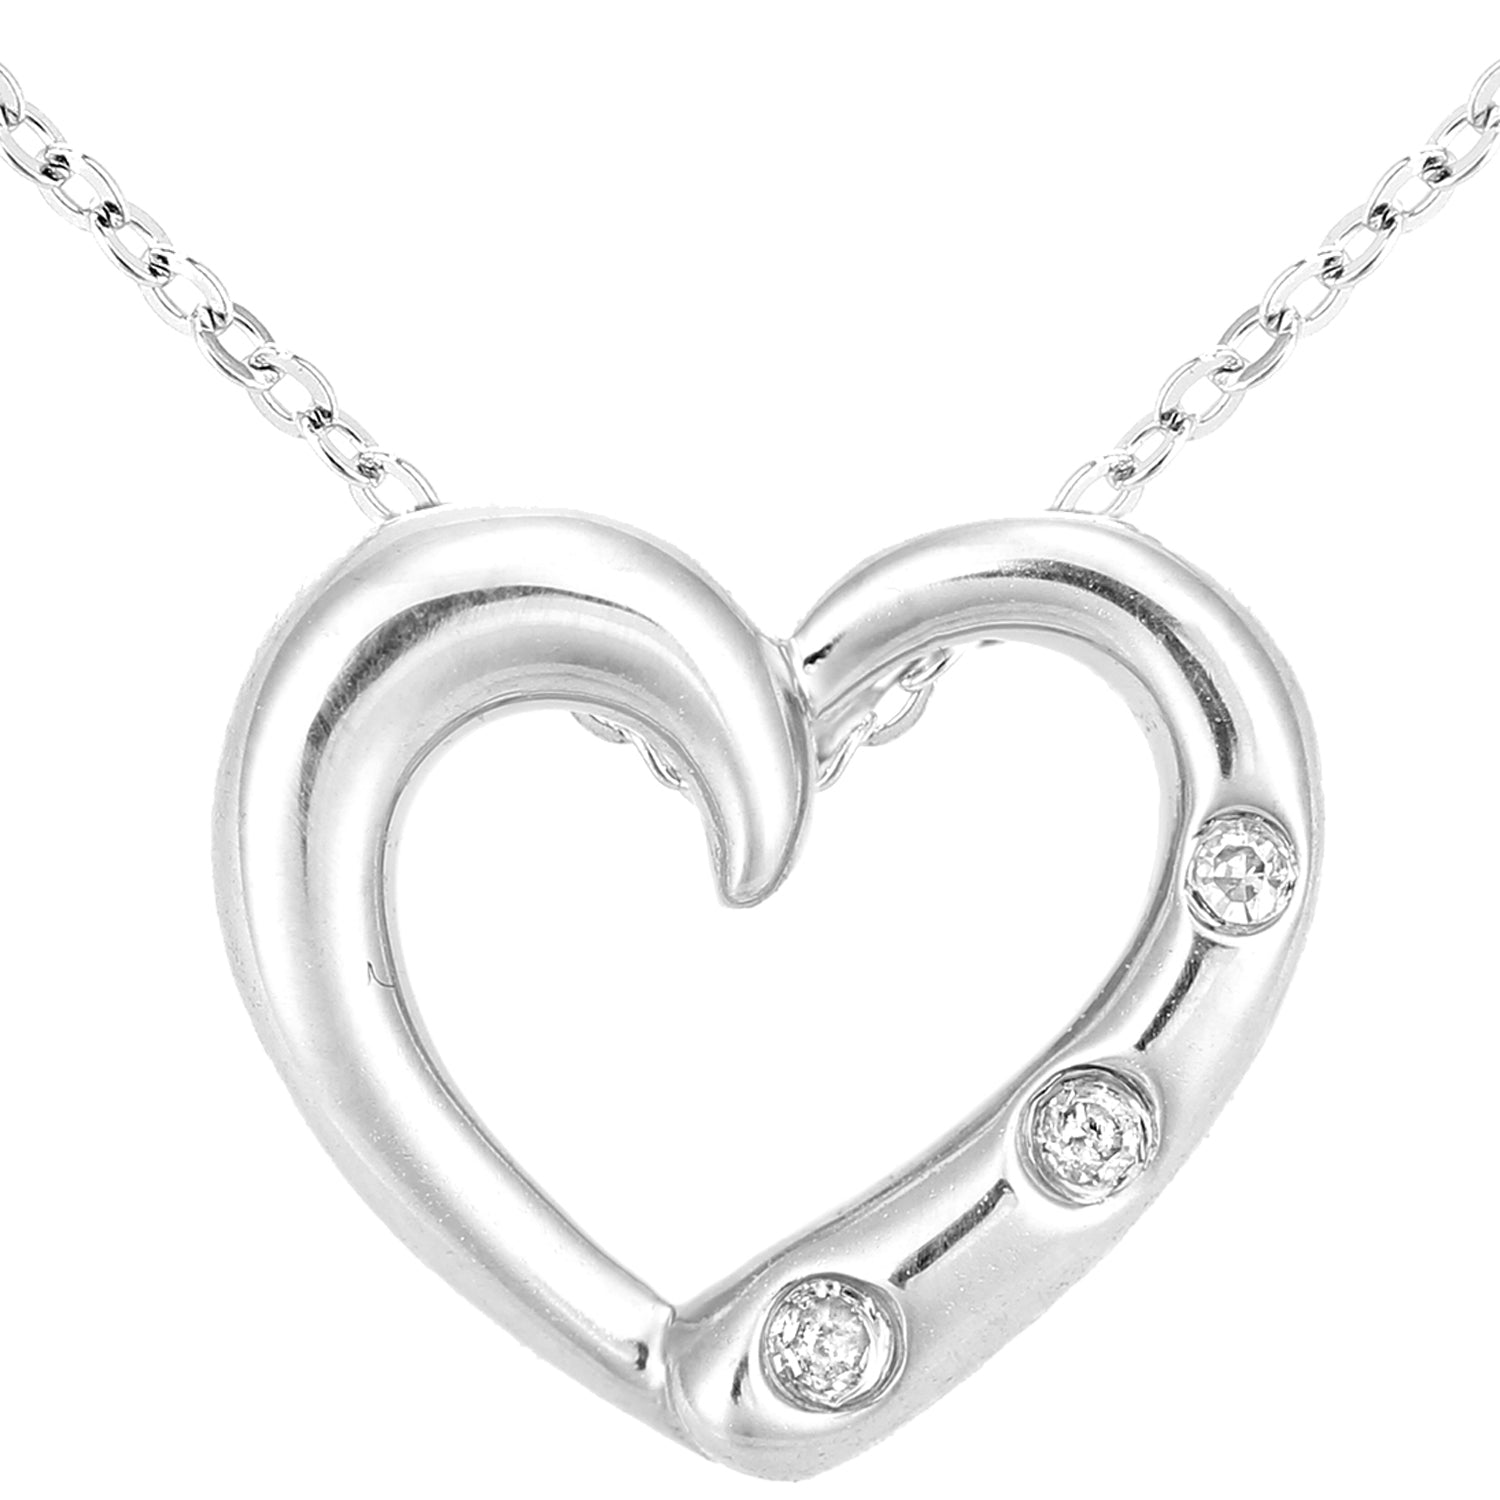 9ct White Gold  Round 1pts Diamond Heart Pendant Necklace 18 inch - PP0AXL5961W